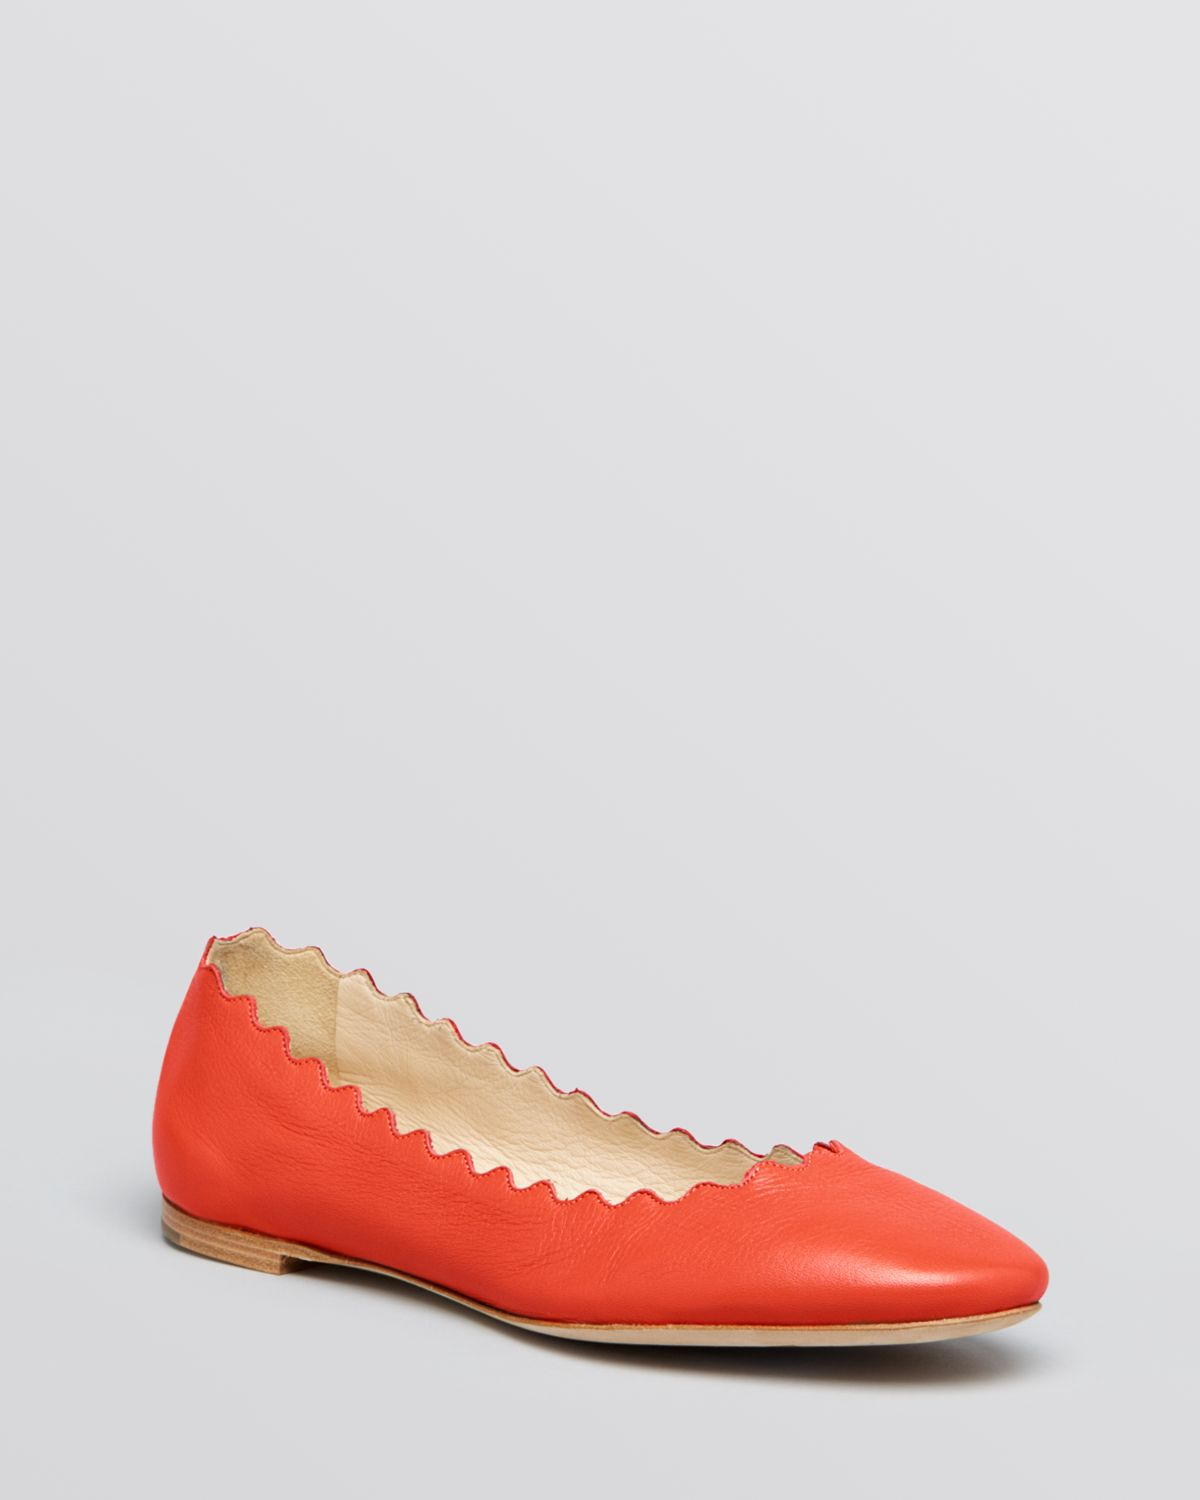 Chloé Scalloped Ballerina Flats in Red | Lyst